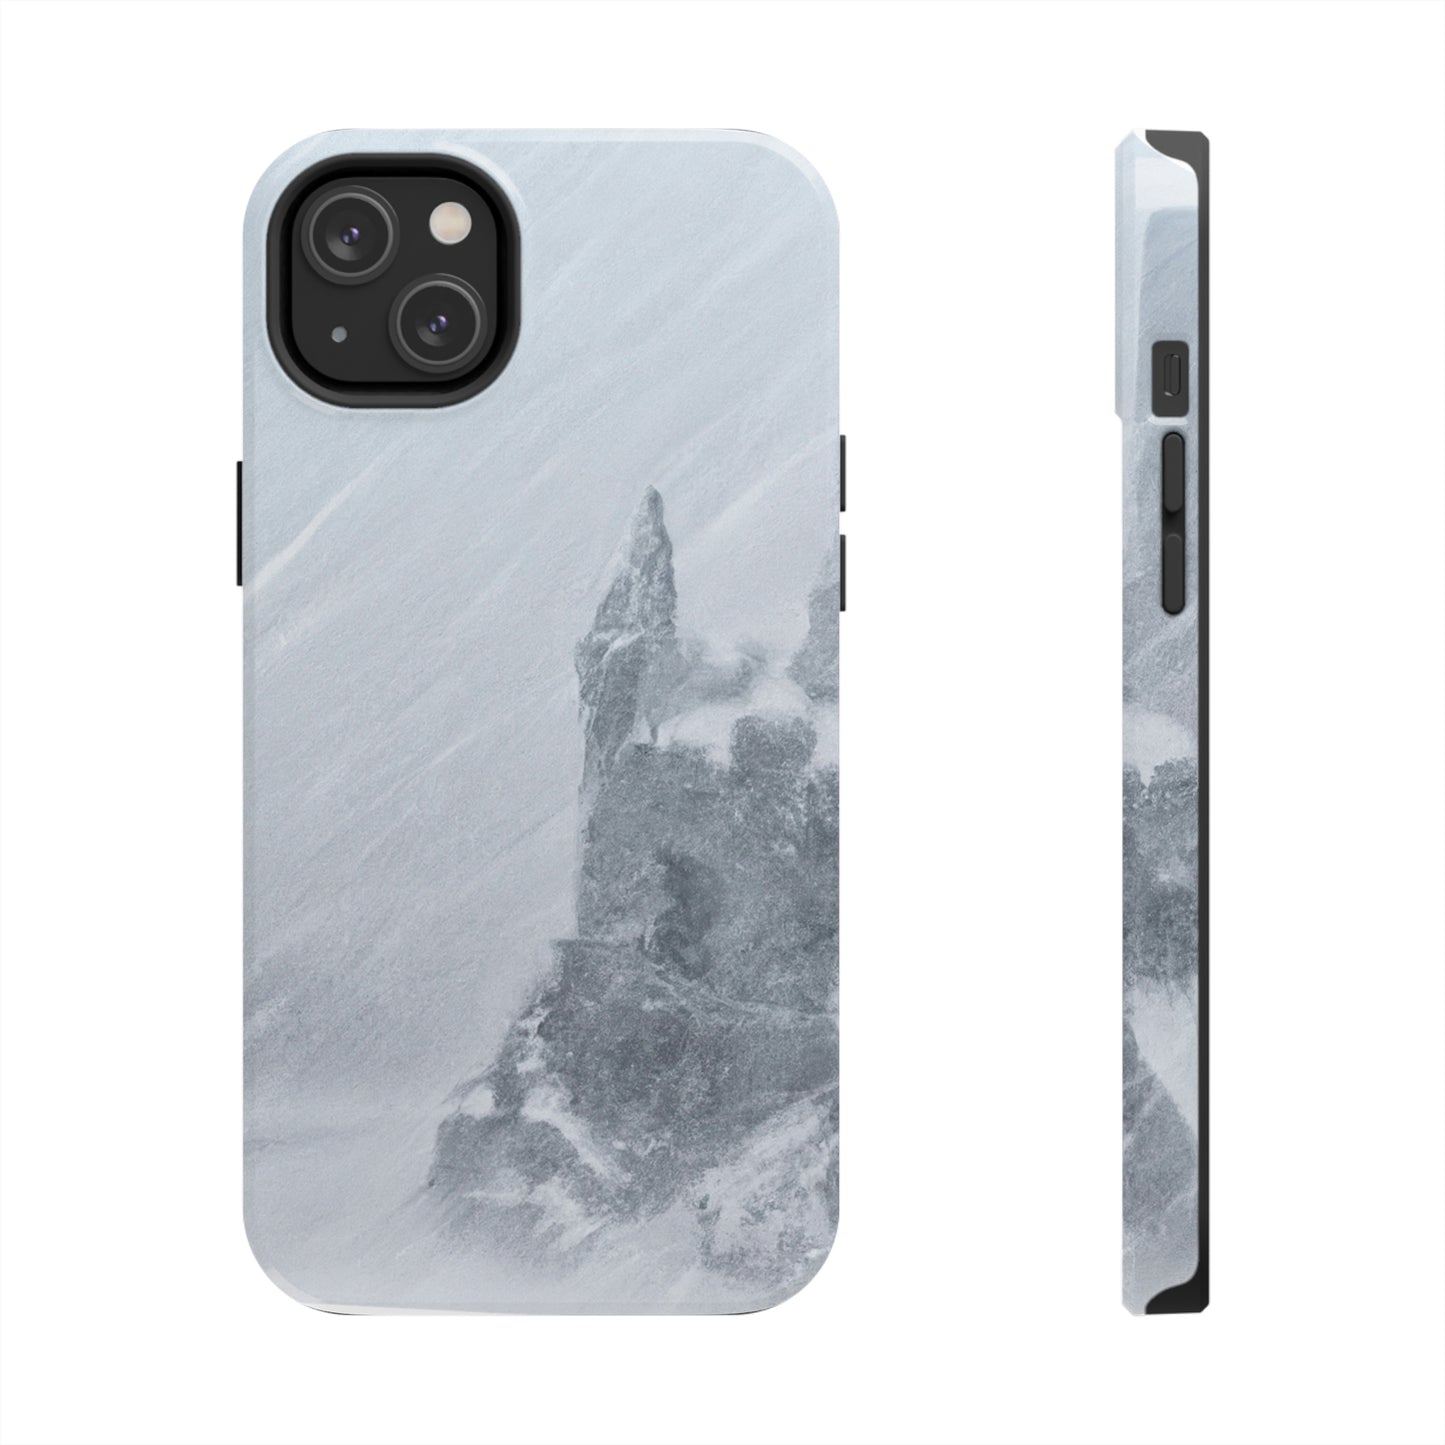 The Lost Castle Within the Snowstorm. - The Alien Tough Phone Cases